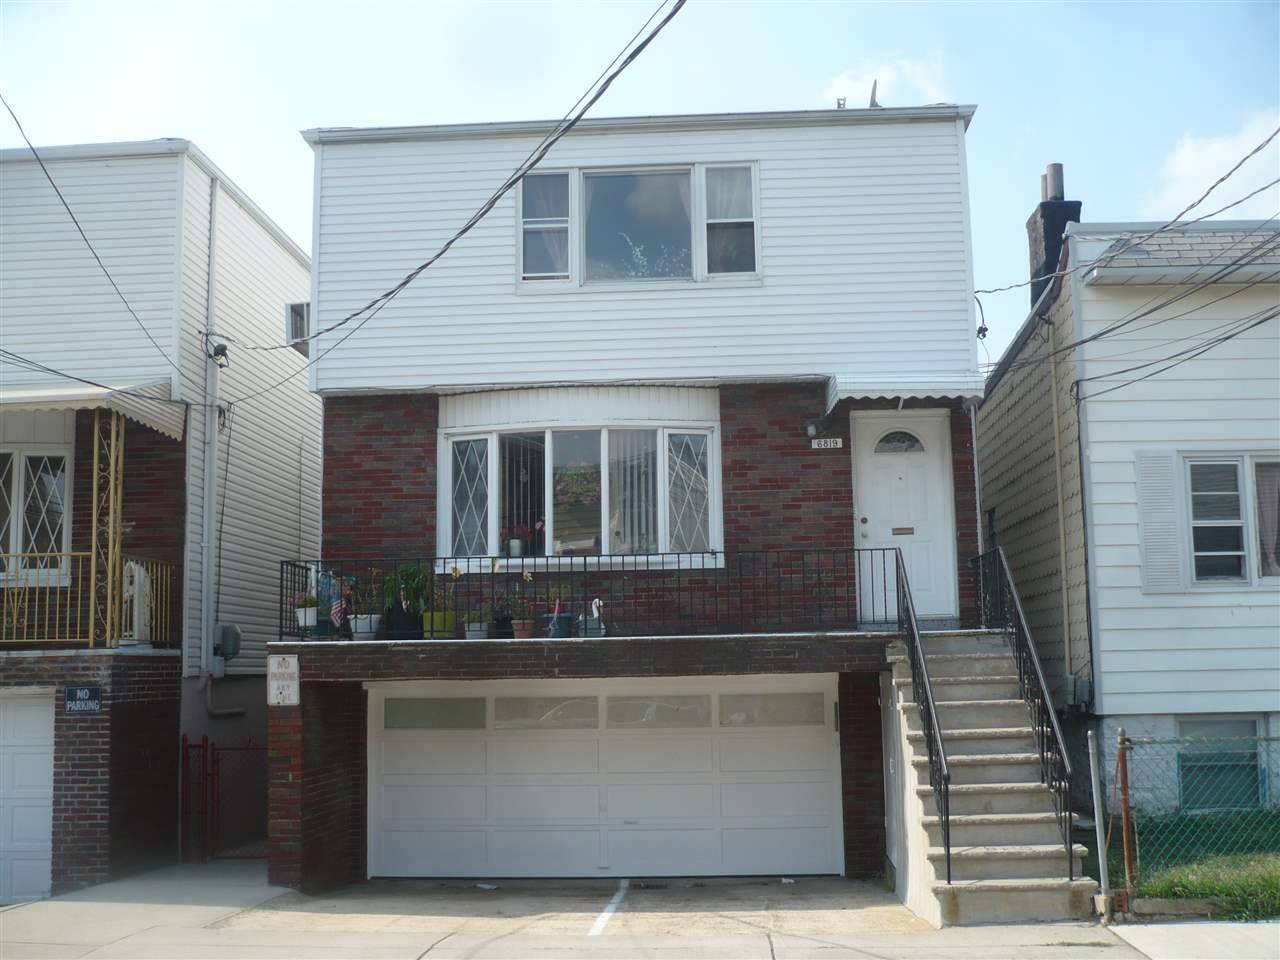 Beautiful two family house in Guttenberg - 2 BR New Jersey